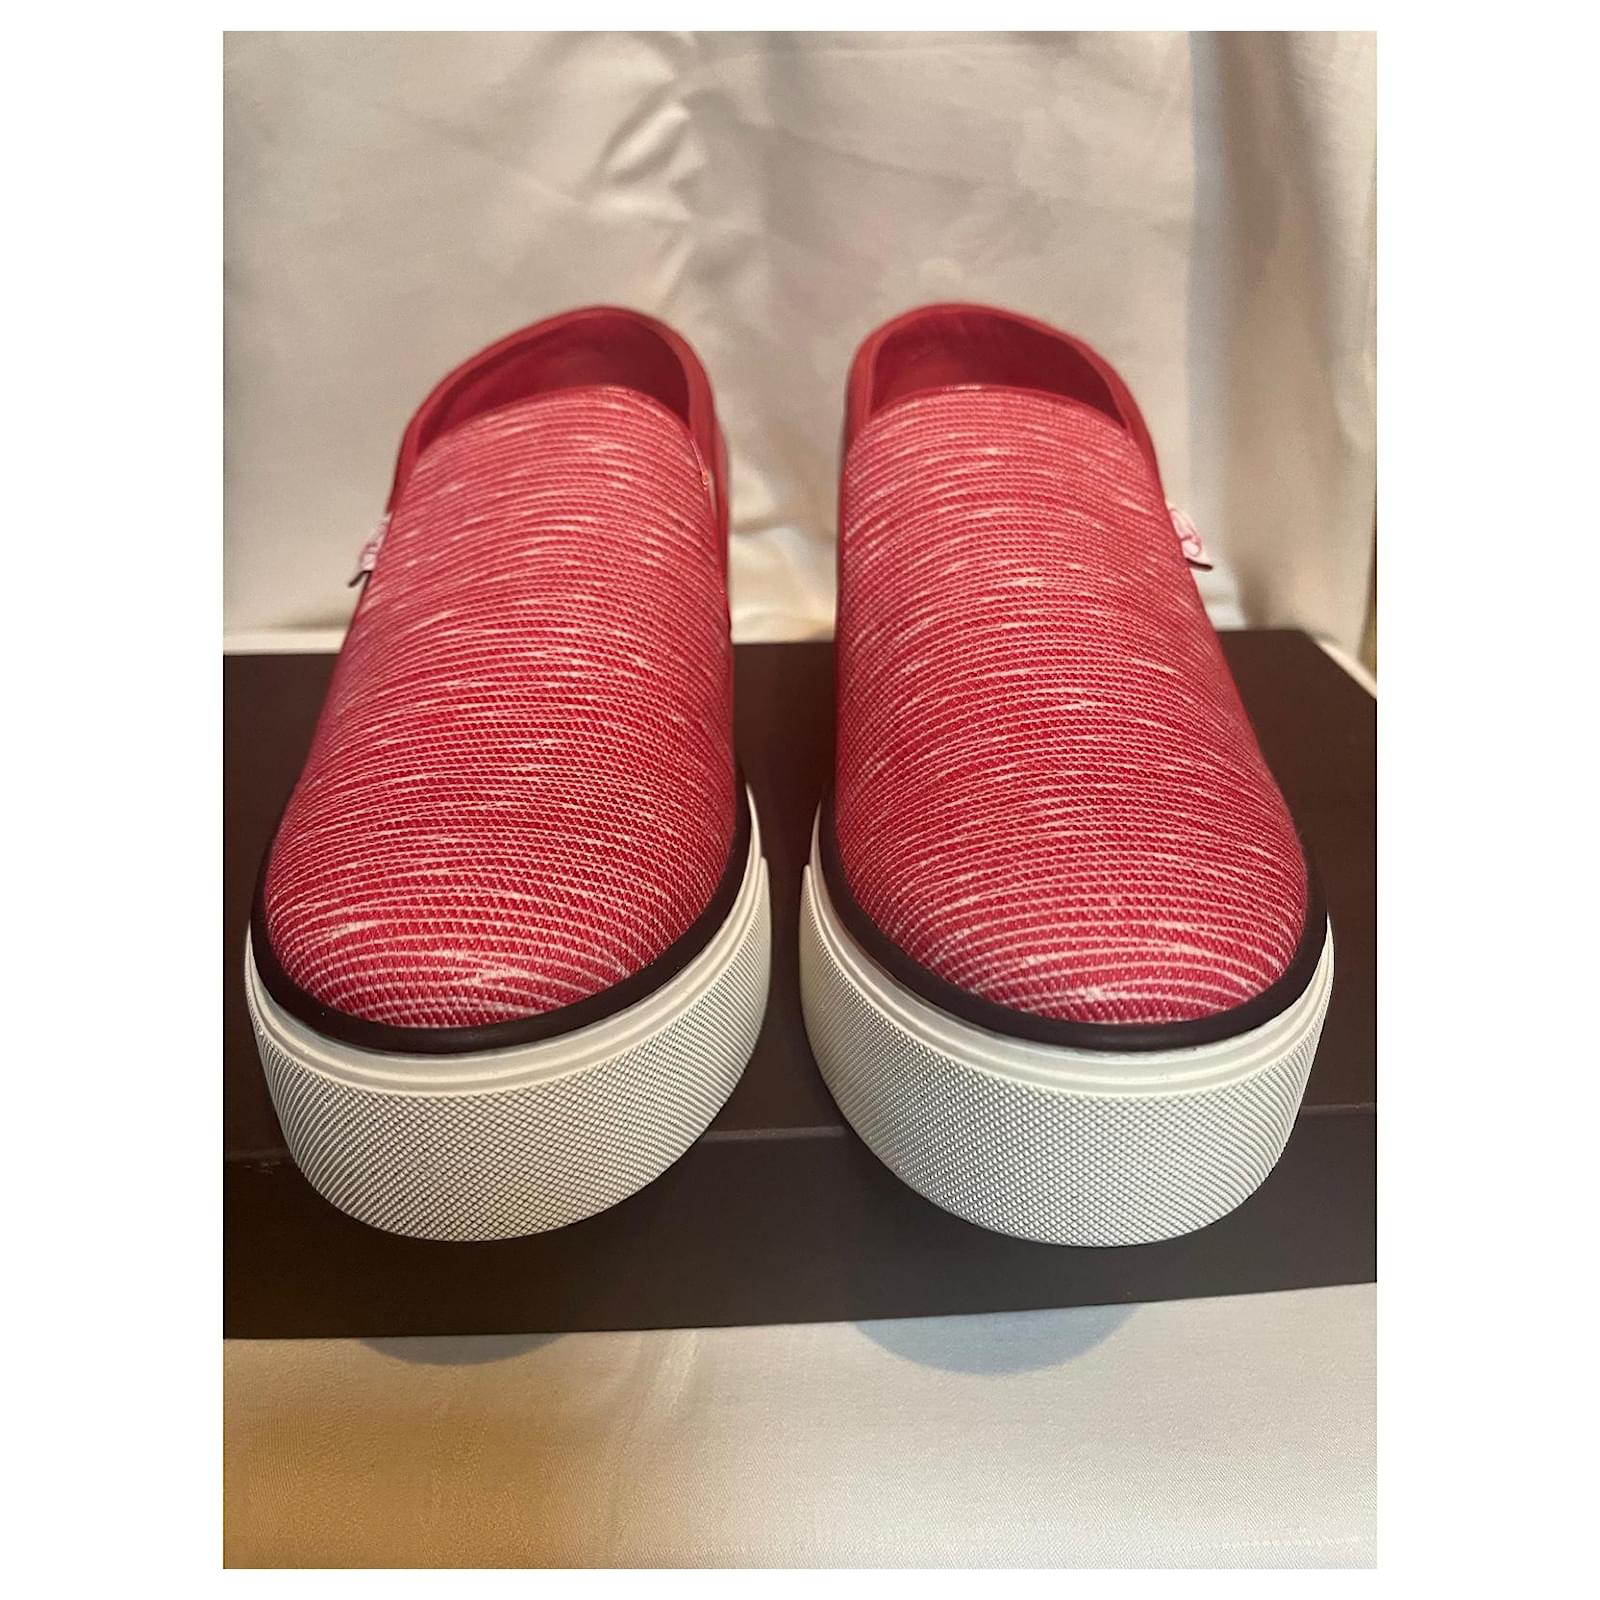 NEW LOUIS VUITTON BASKETS SLIP ON SHOES 36.5 RED PATENT LEATHER